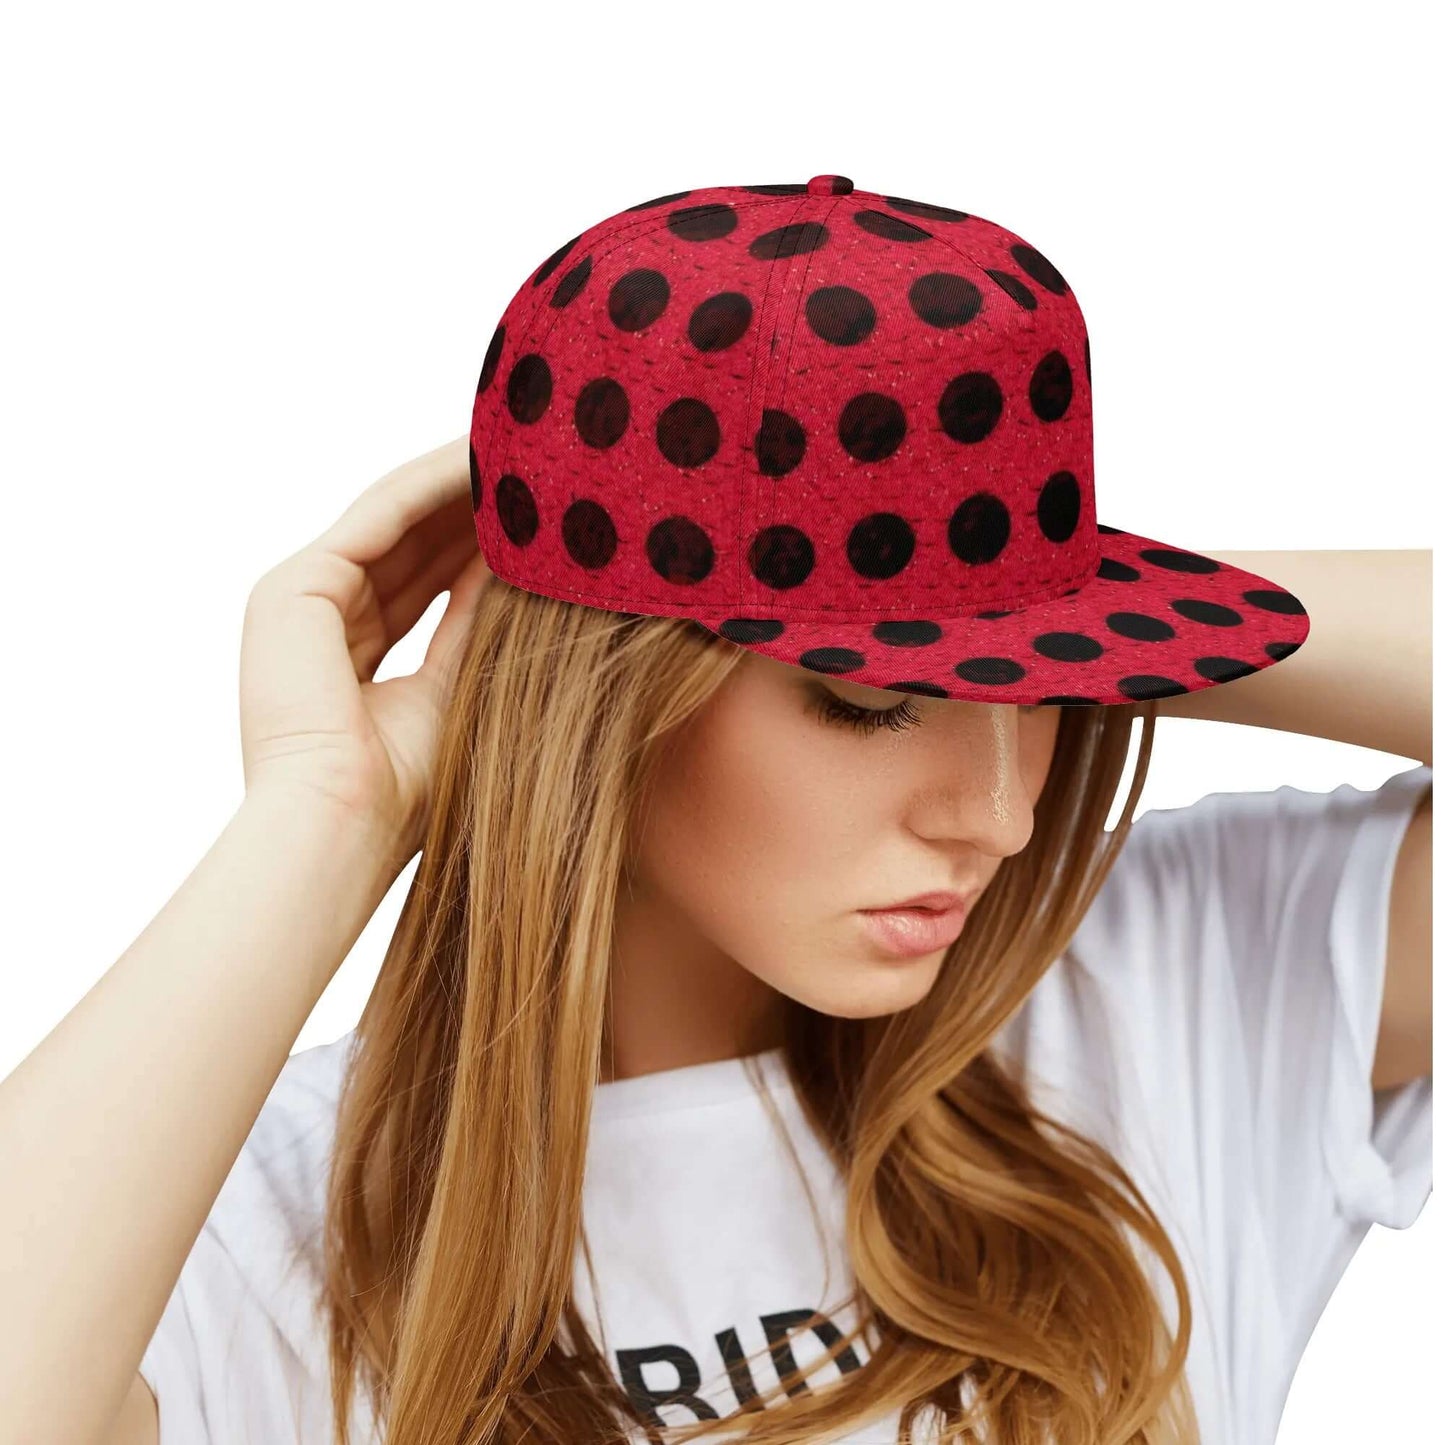 Black Dots Snapback Hat | Classic Red All Over Print